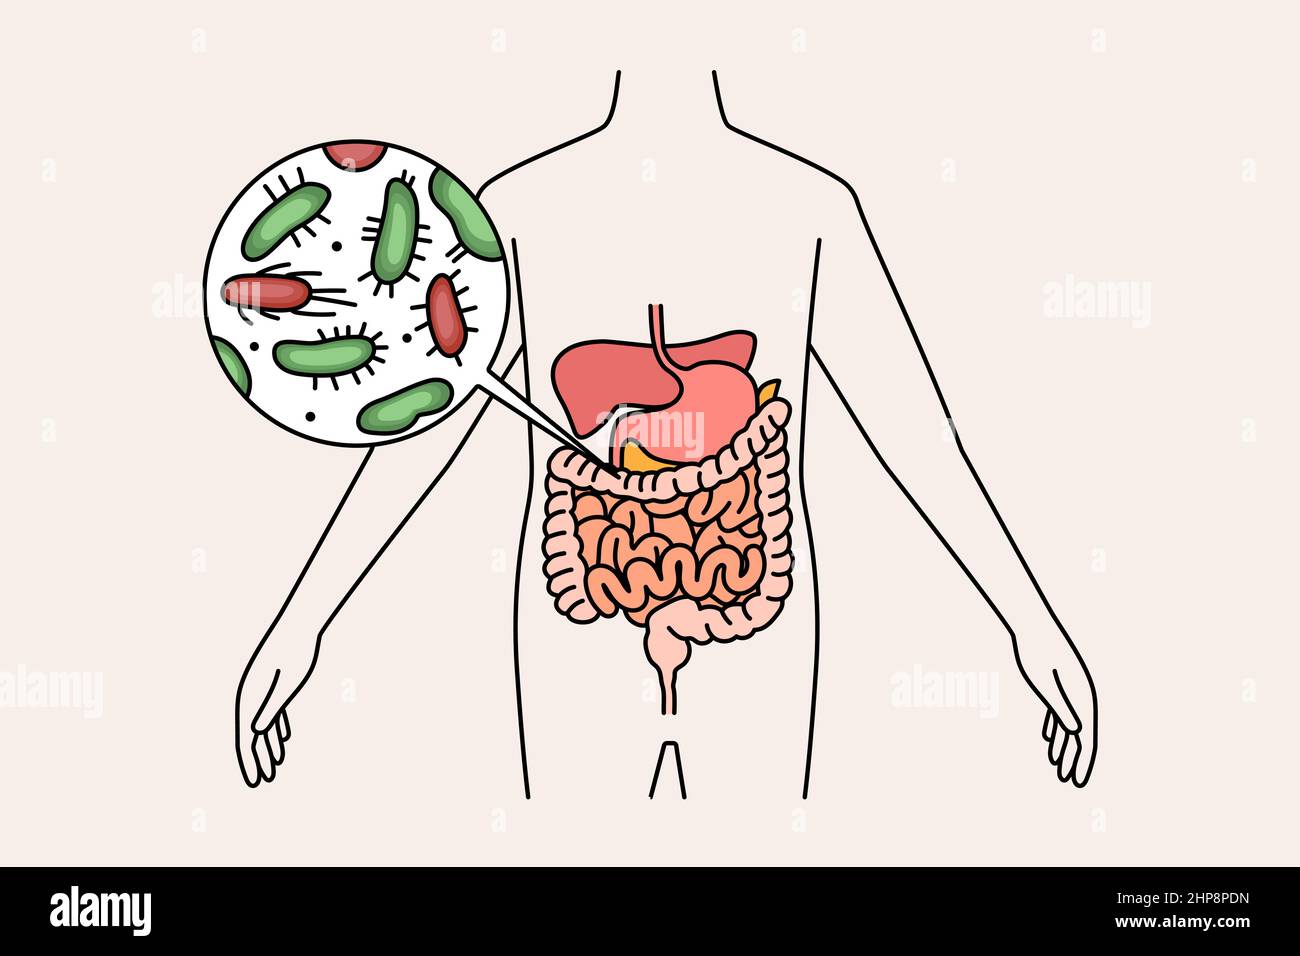 Digestive system and intestines concept. Stock Vector